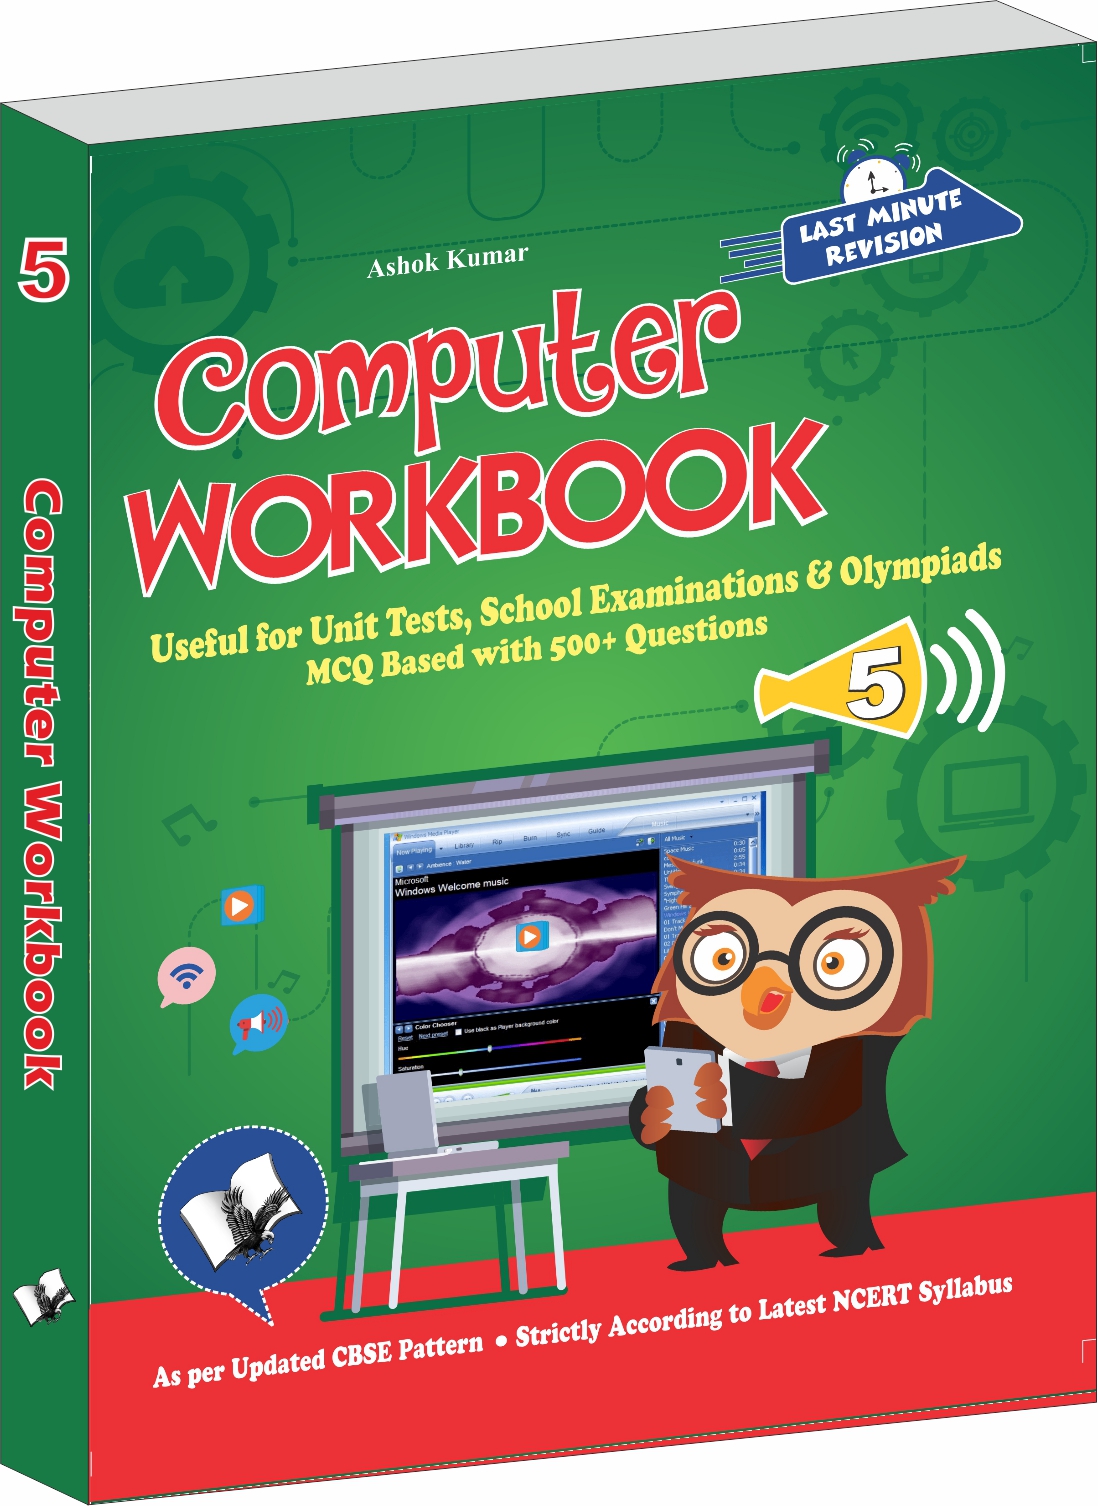 Computer Workbook Class 5-Useful for Unit Tests, School Examinations & Olympiads